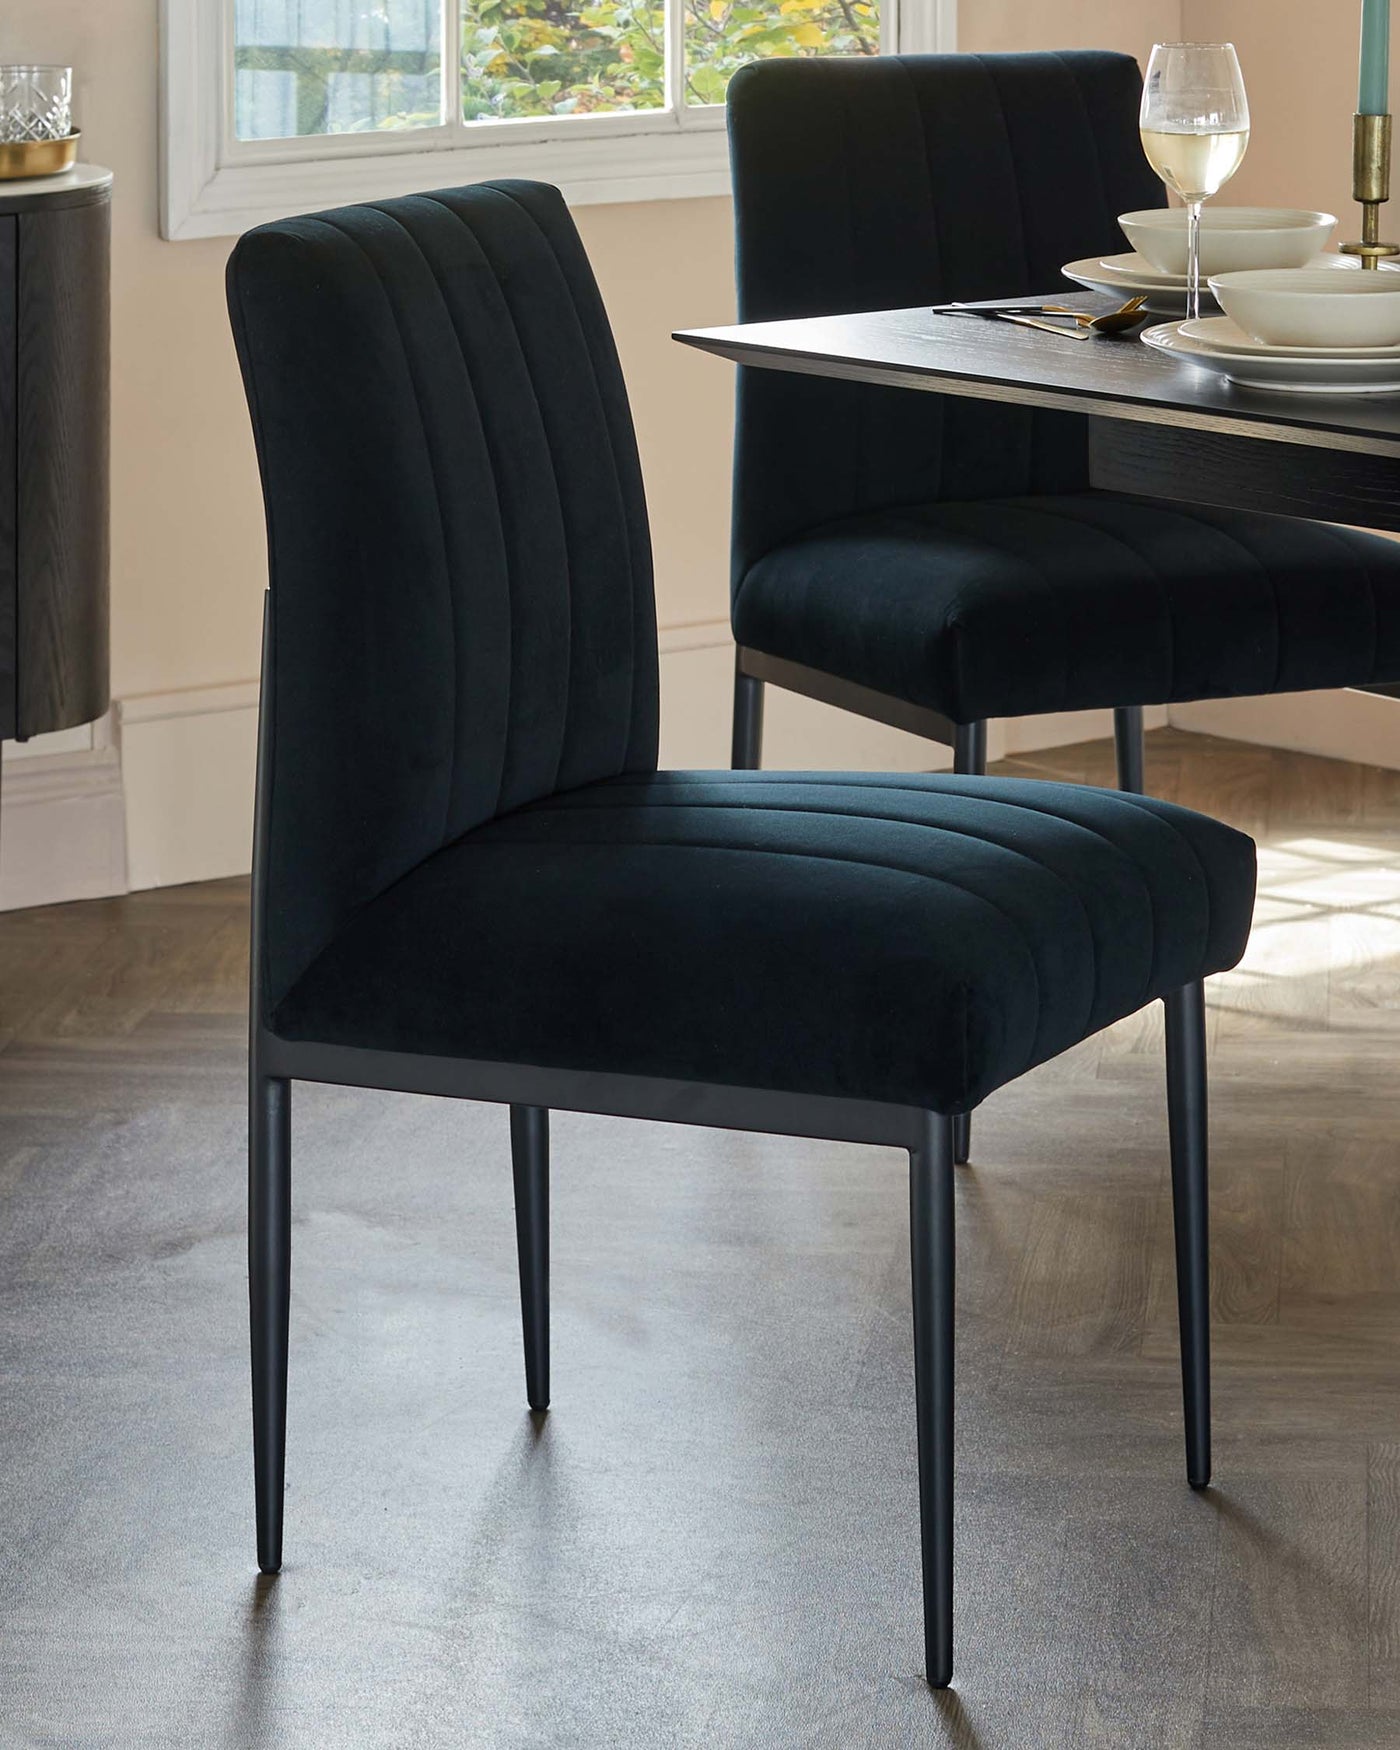 Elegant dining setting featuring modern velvet upholstered chairs with vertical channel tufting on the backrest and sleek black metal legs, complemented by a contemporary black dining table with a minimalist design, set against a room with natural light and a neutral colour palette.